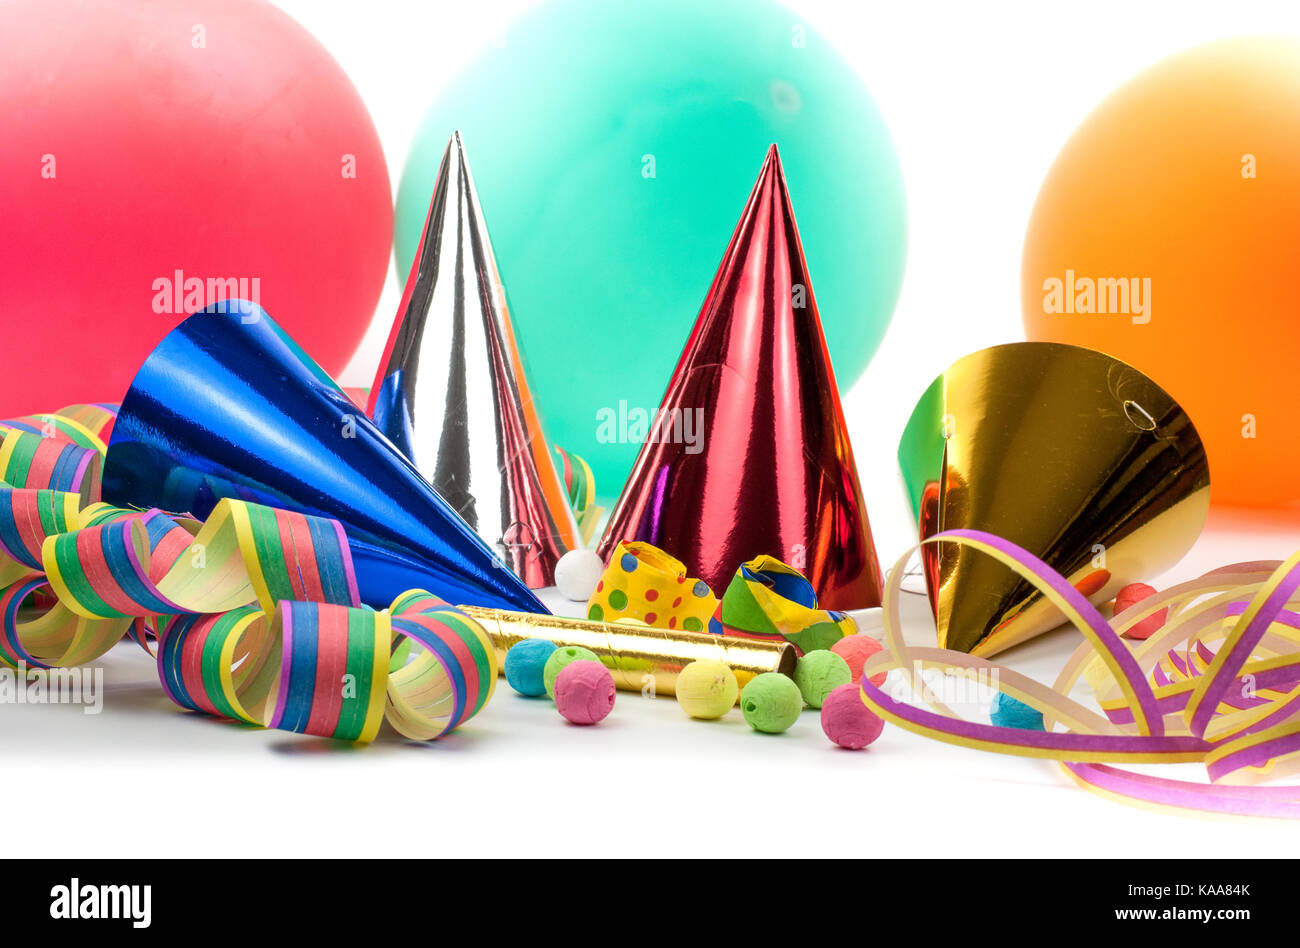 Colorful Cotillons for Party on White Stock Photo - Image of